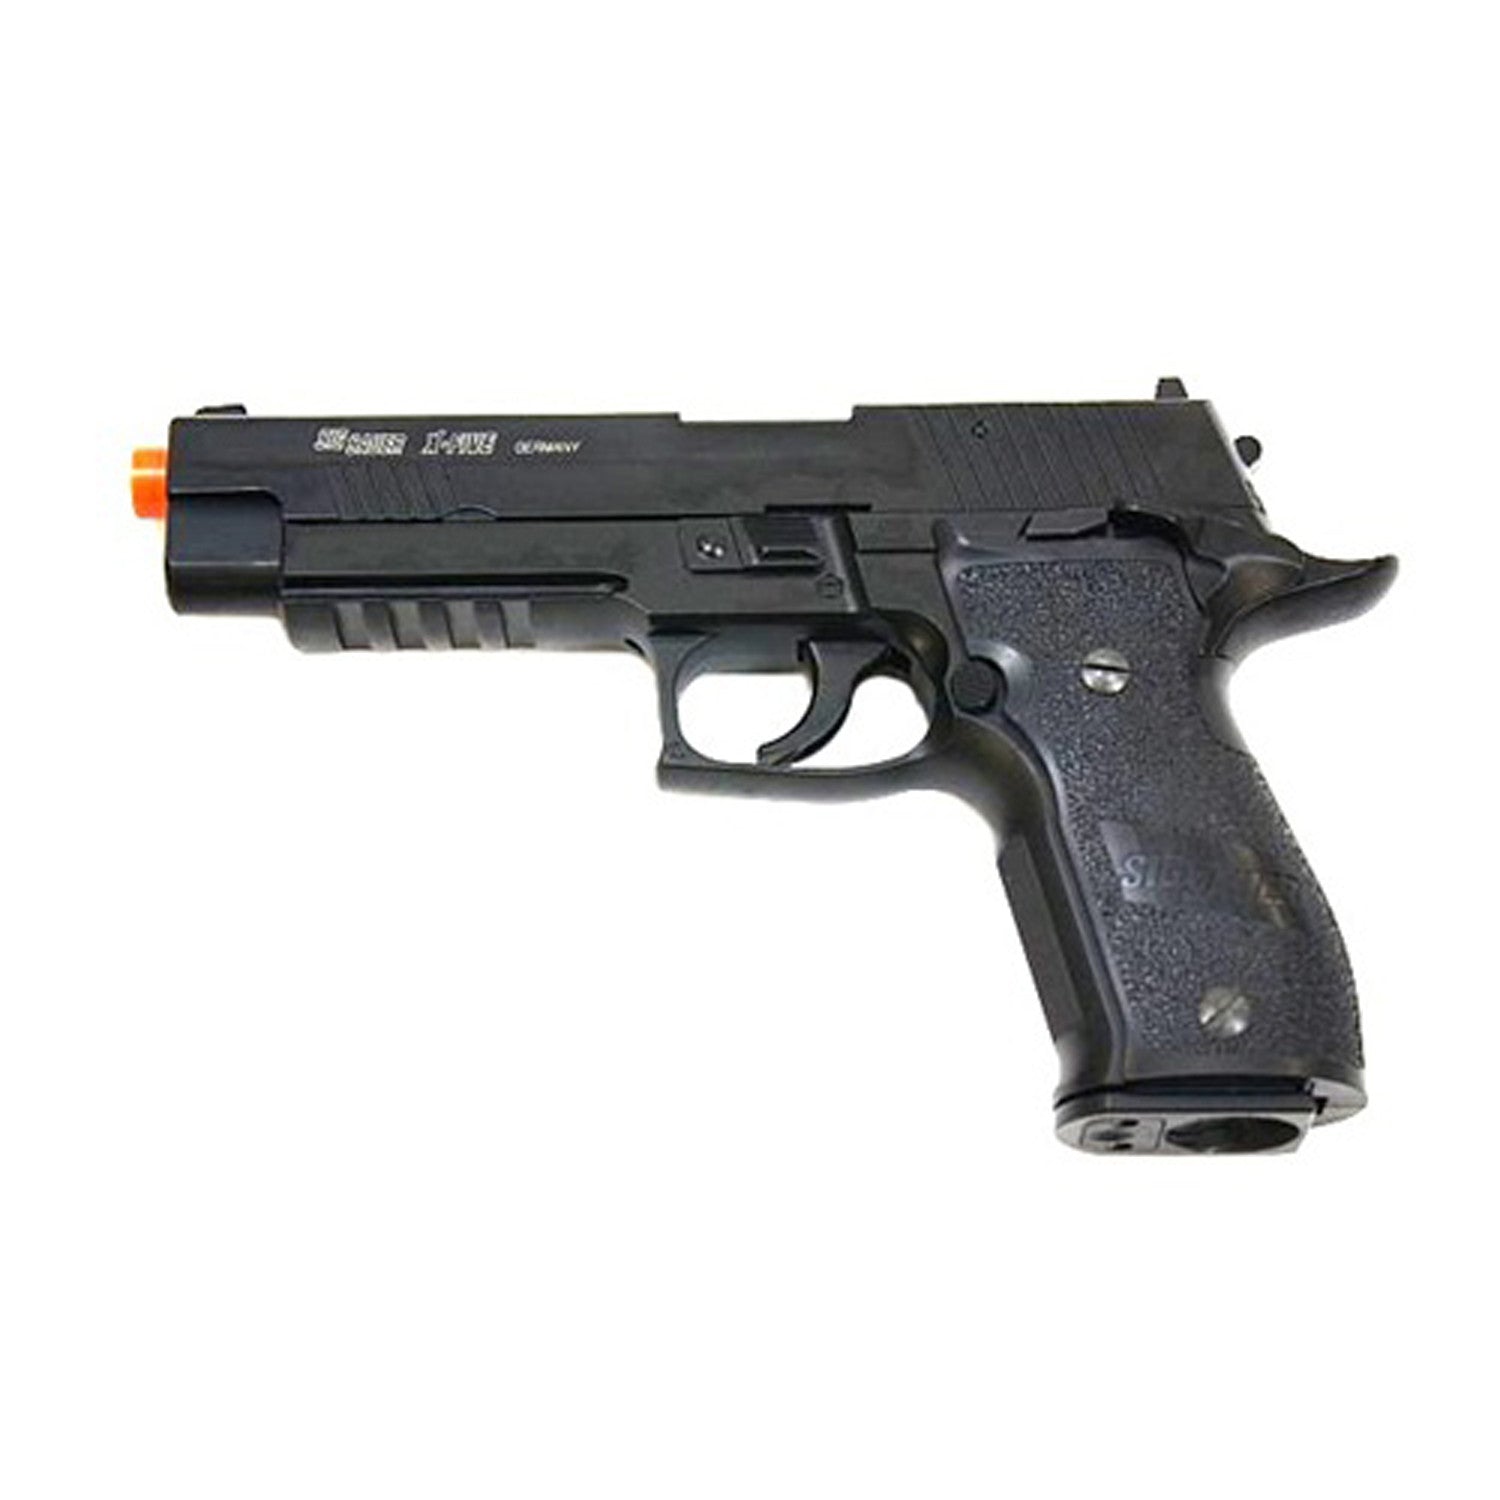 HFC SIG P226 Gas Blow Back - Gas Blowback Full Metal 24 Round Mag Muzzle Velocity 330FPS